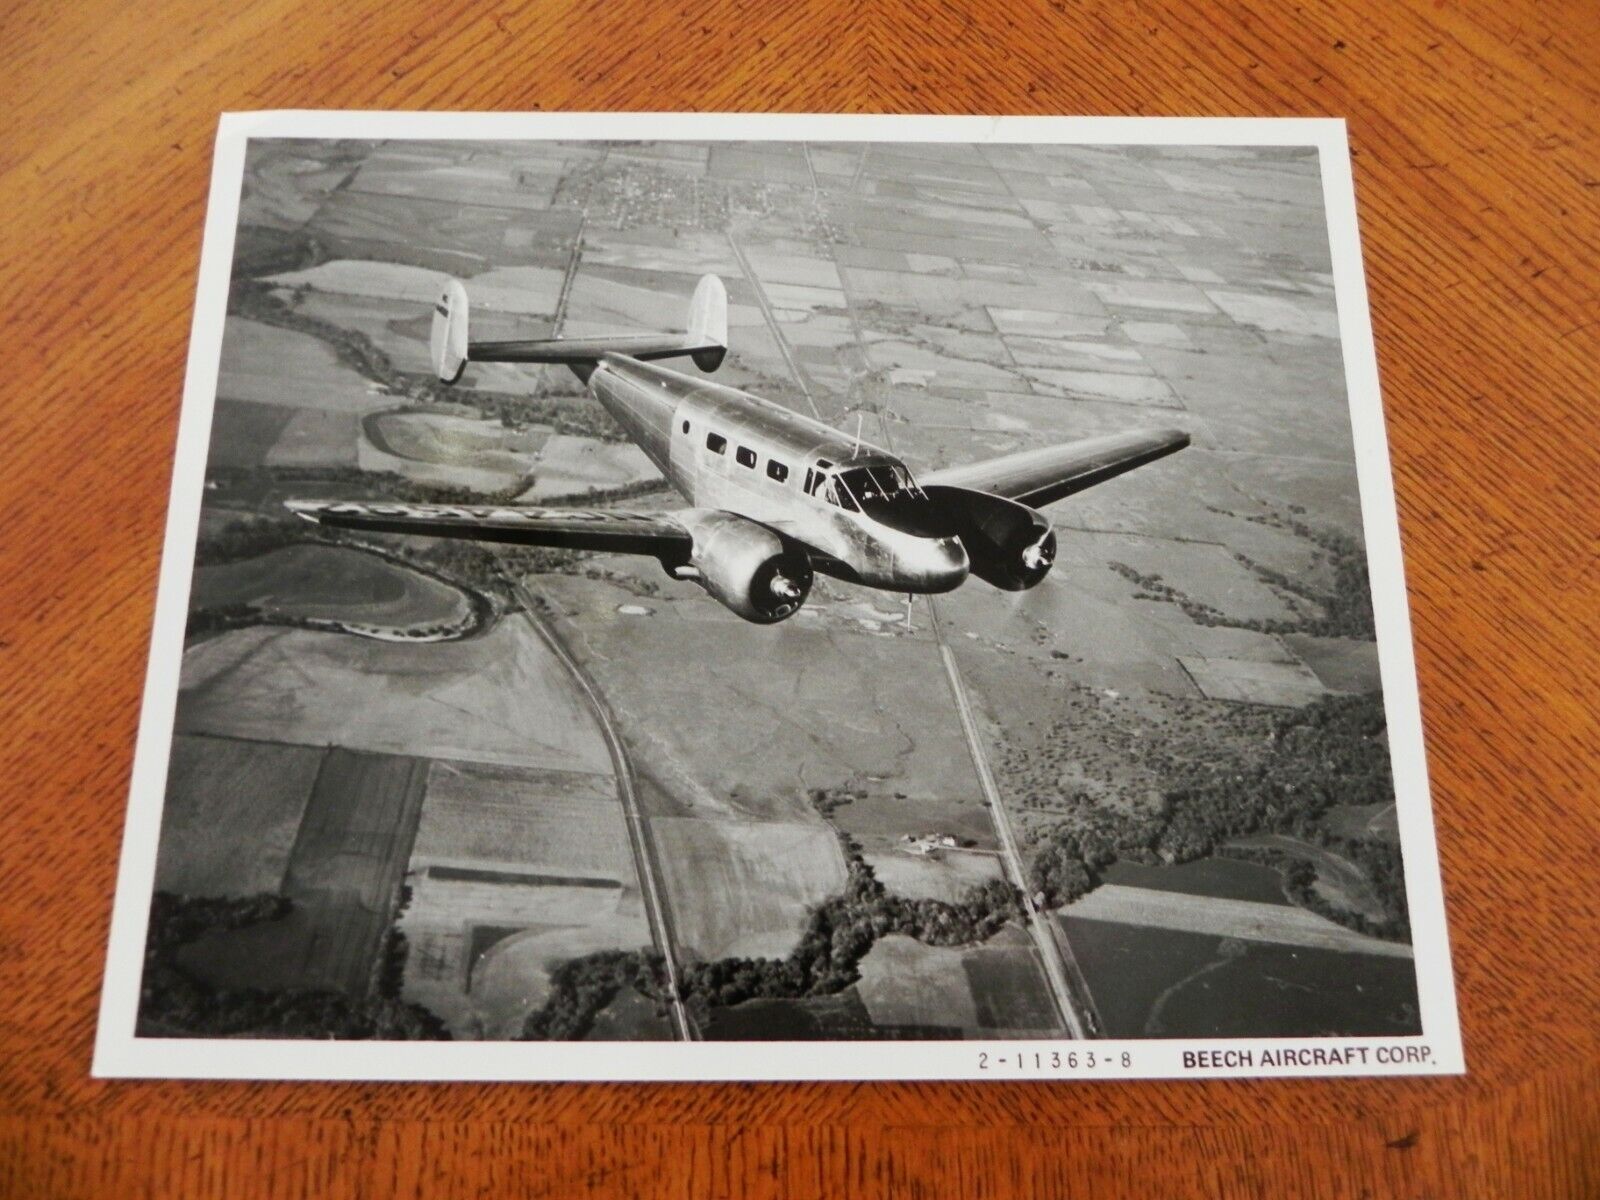 KGgallery Beechcraft Beech Aircraft USAF Military Photo Airplane Plane D18S Twin